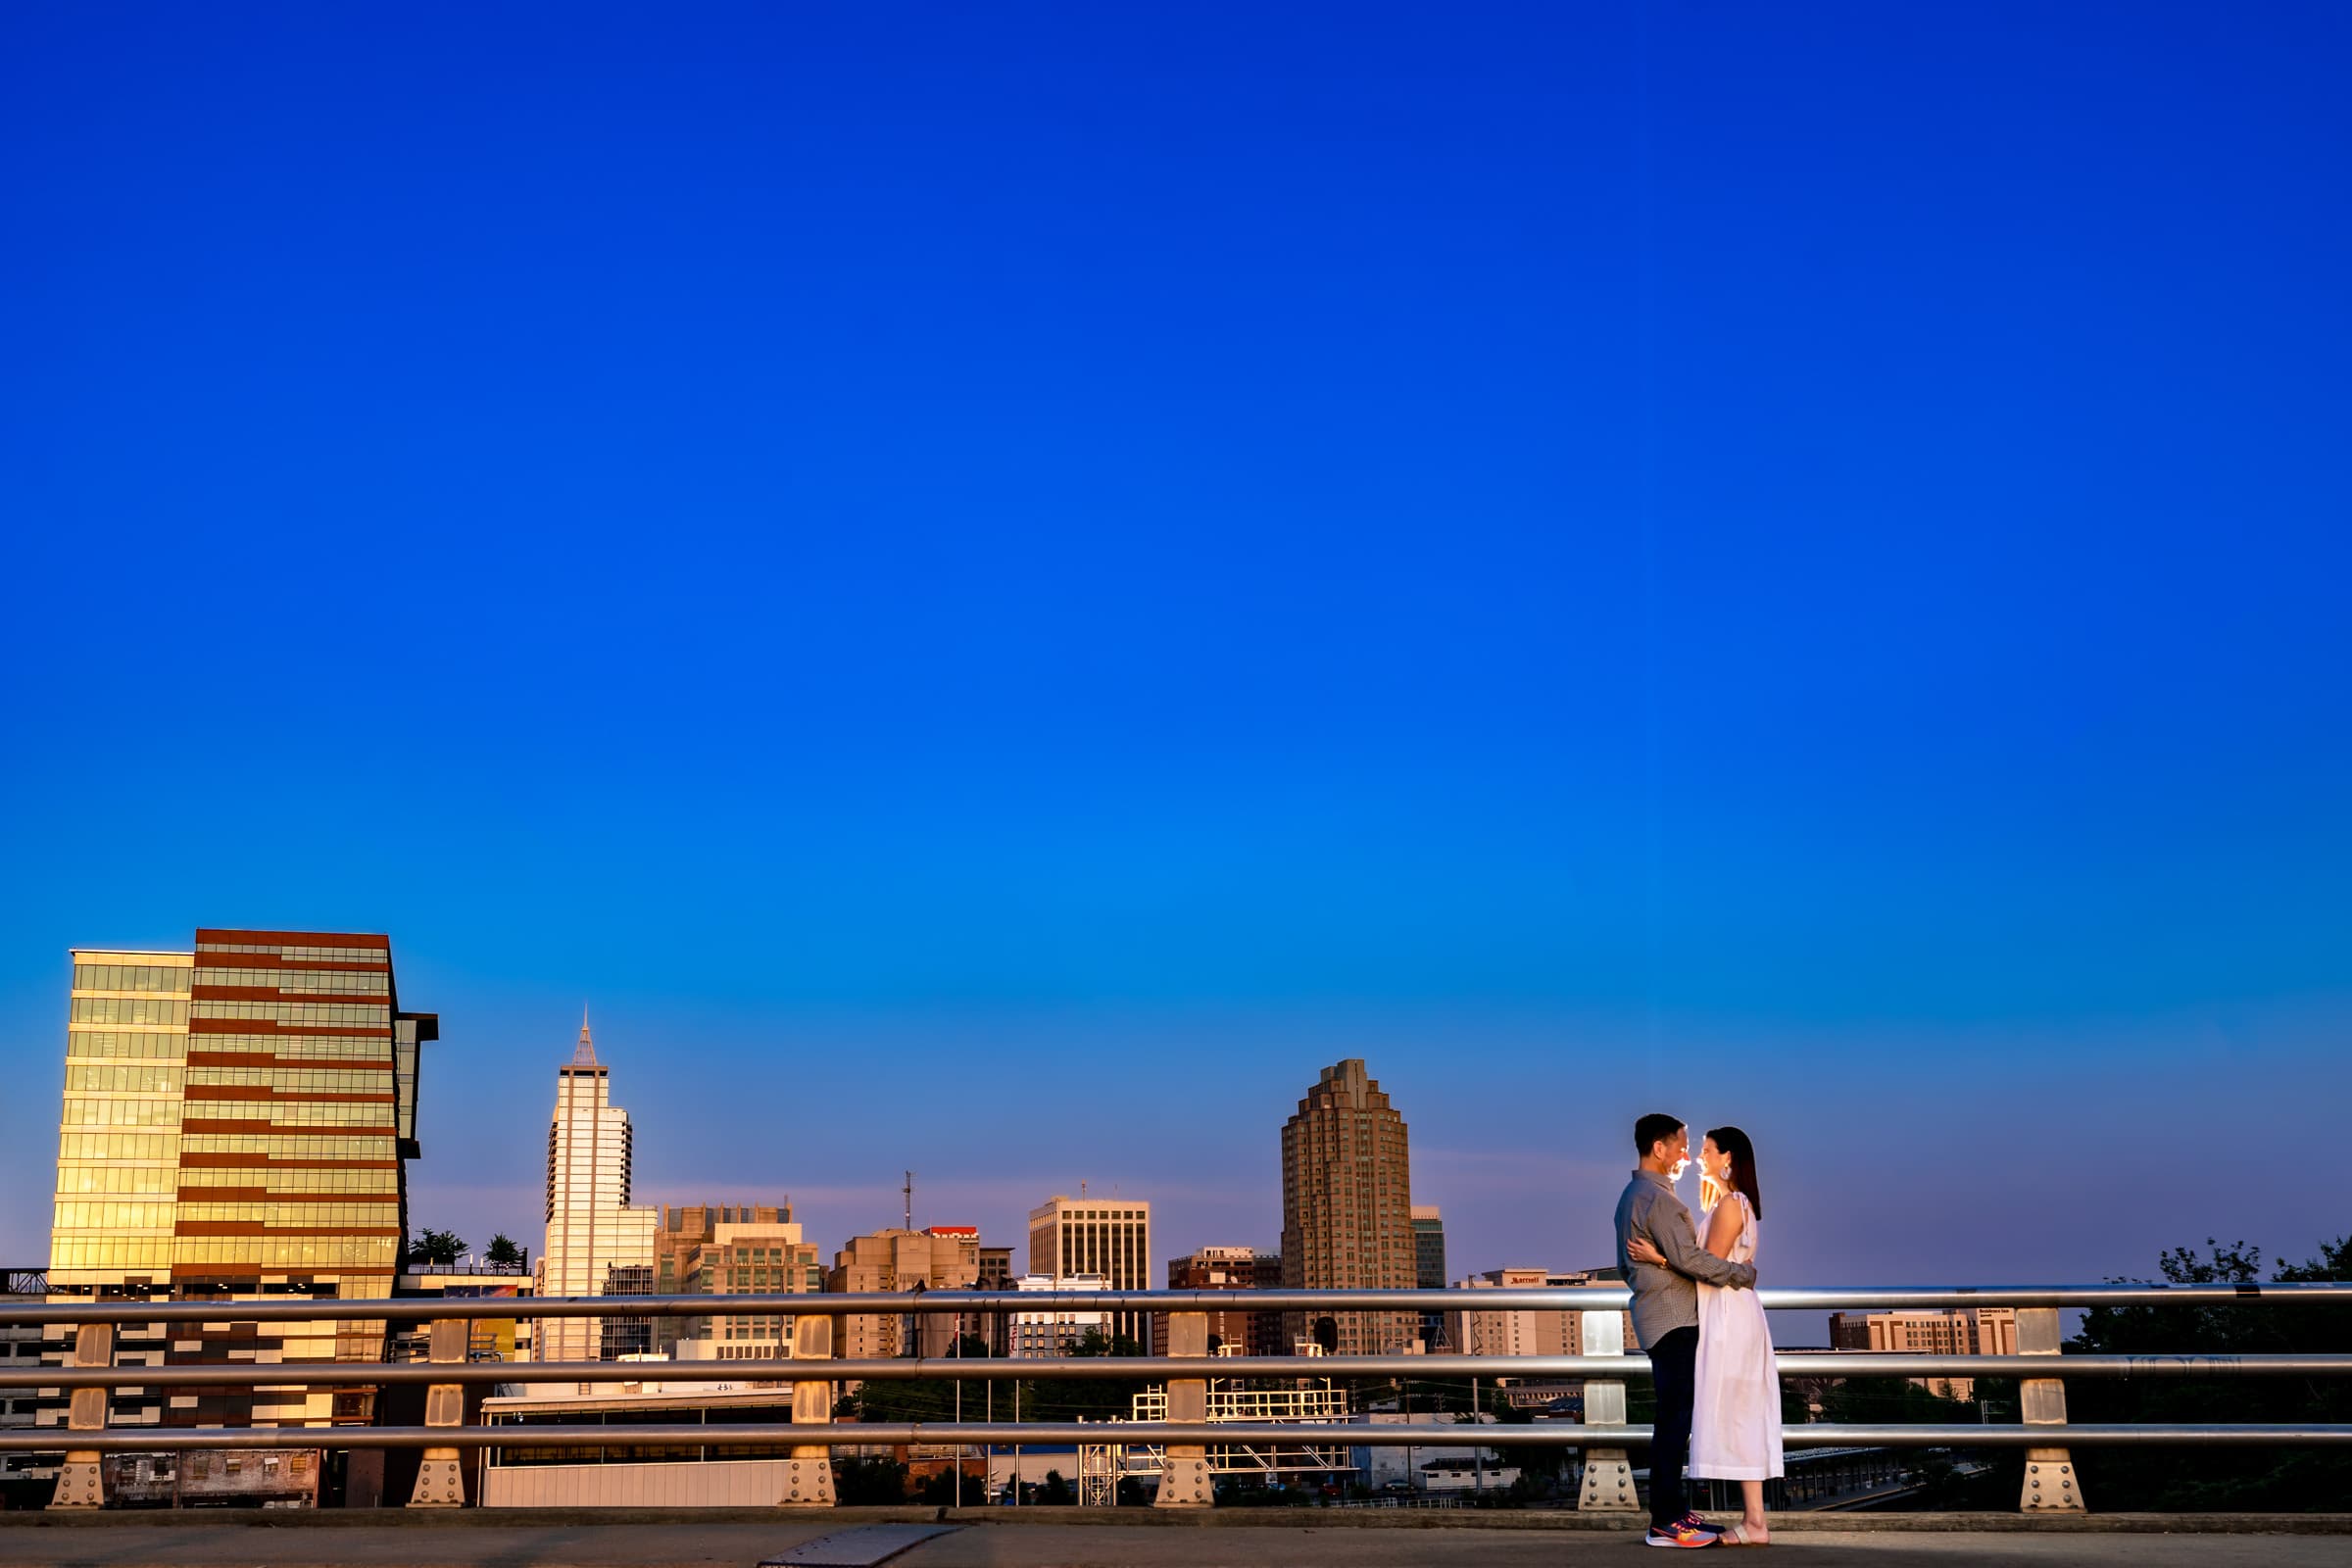 portrait of an engaged couple with the Raleigh skyline in the background behind them | photo by Kivus & Camera